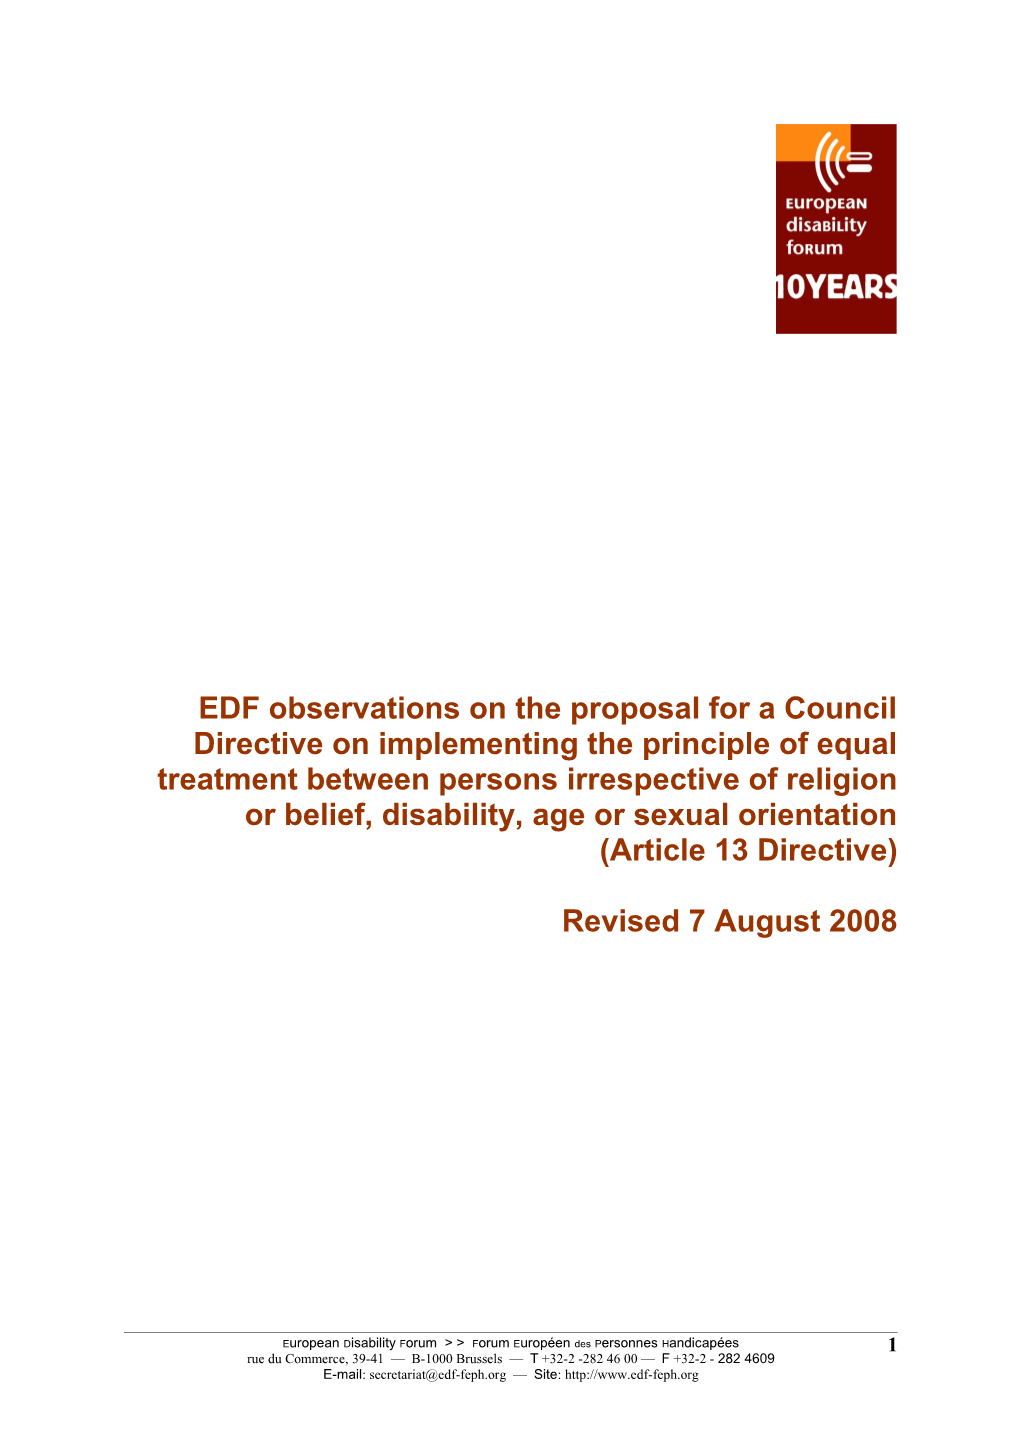 EDF Preliminary Comments to the Article 13 Draft Directive